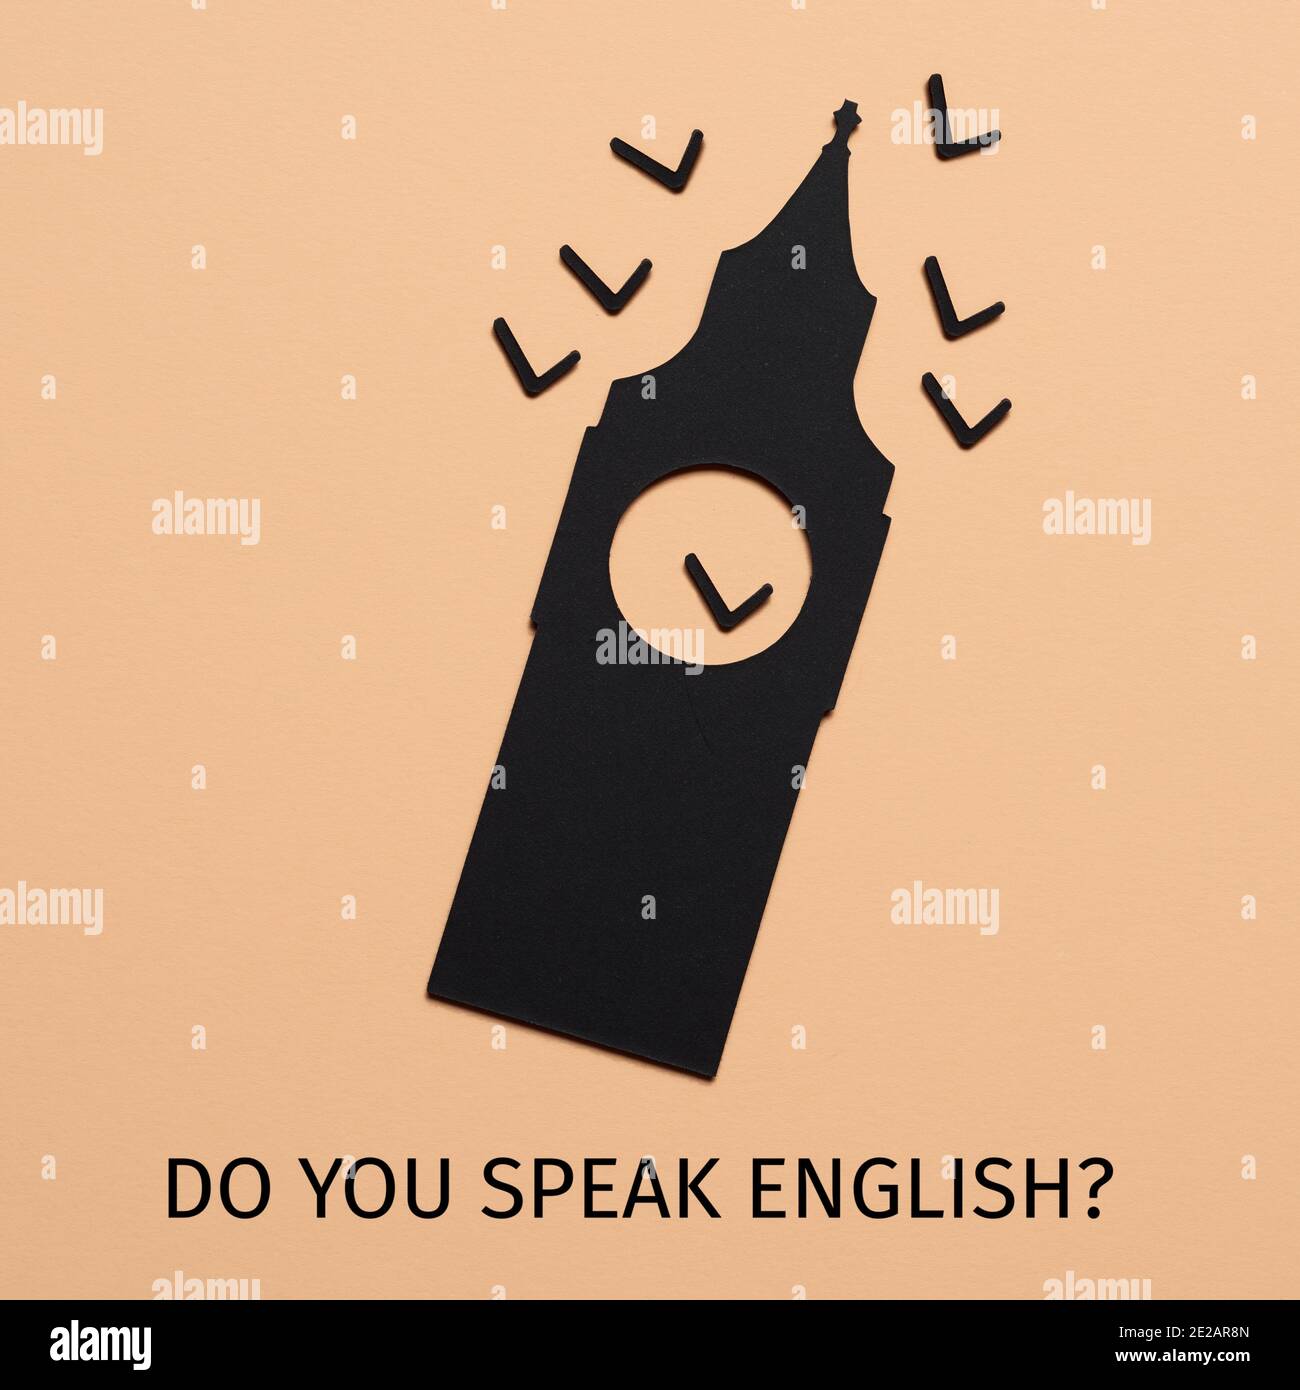 the big ben, cutout on a black paperboard, and the question do you speak english written on a pale brown background Stock Photo